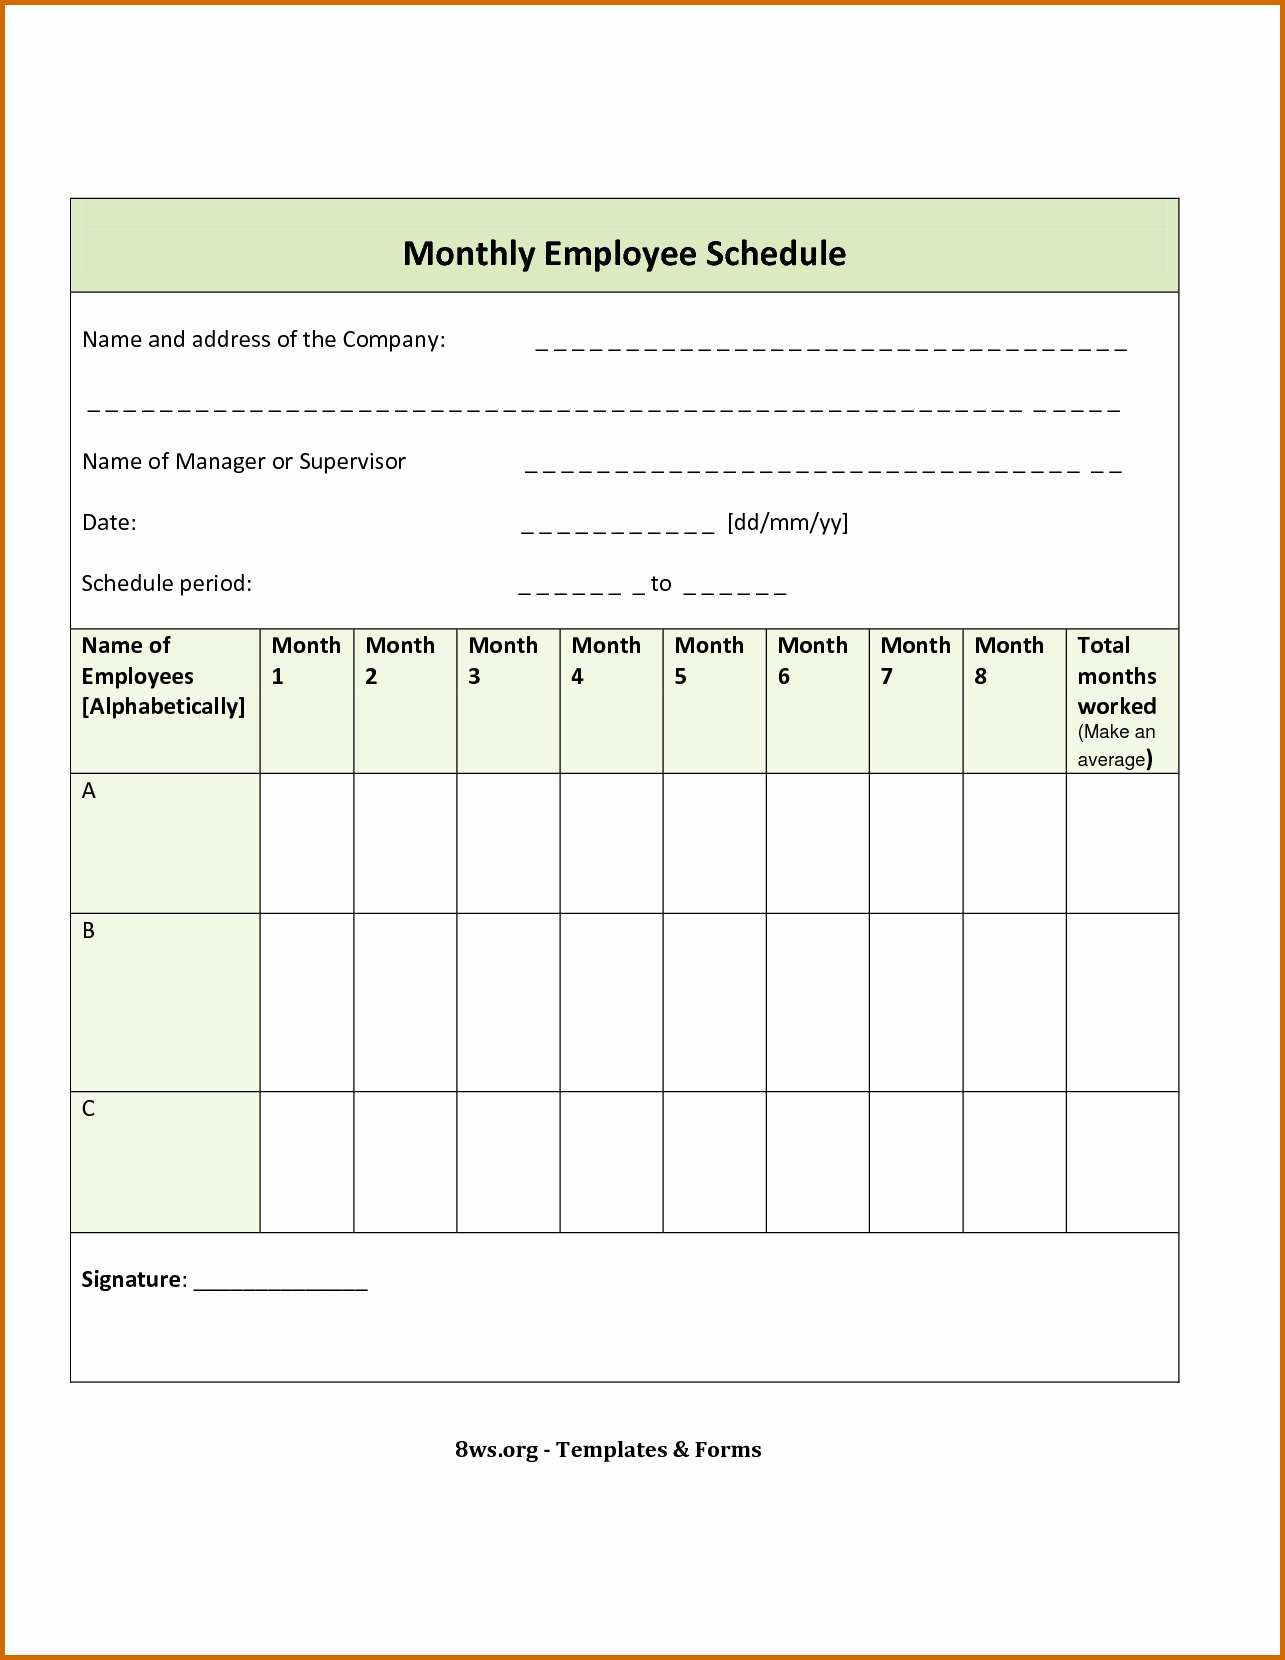 Employee Monthly Schedule Template Lovely Blank Weekly Employee Schedule Template to Pin On